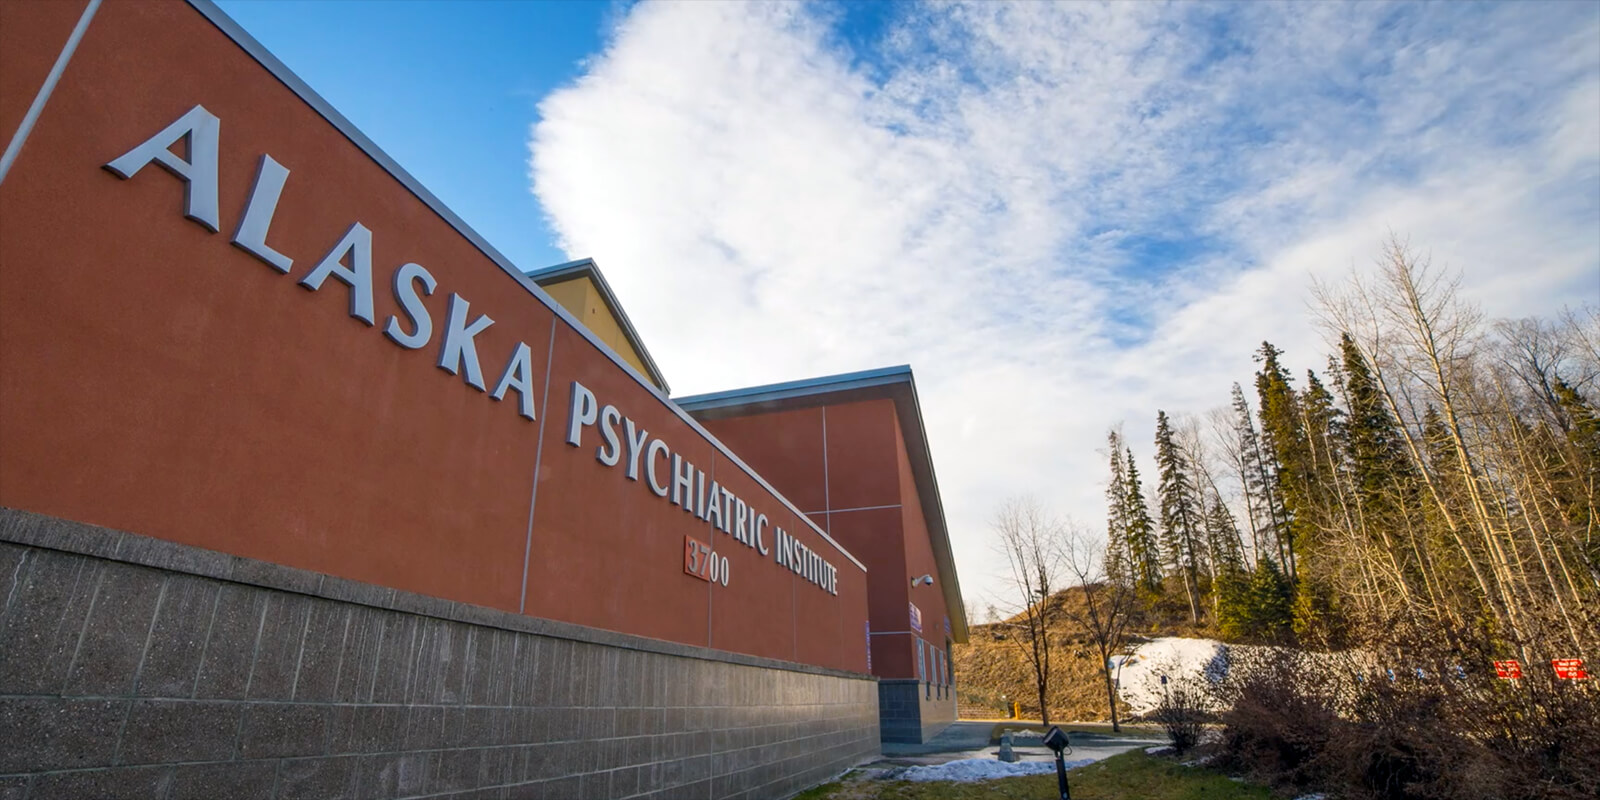 Fight is on to Save Alaska Psychiatric Institute